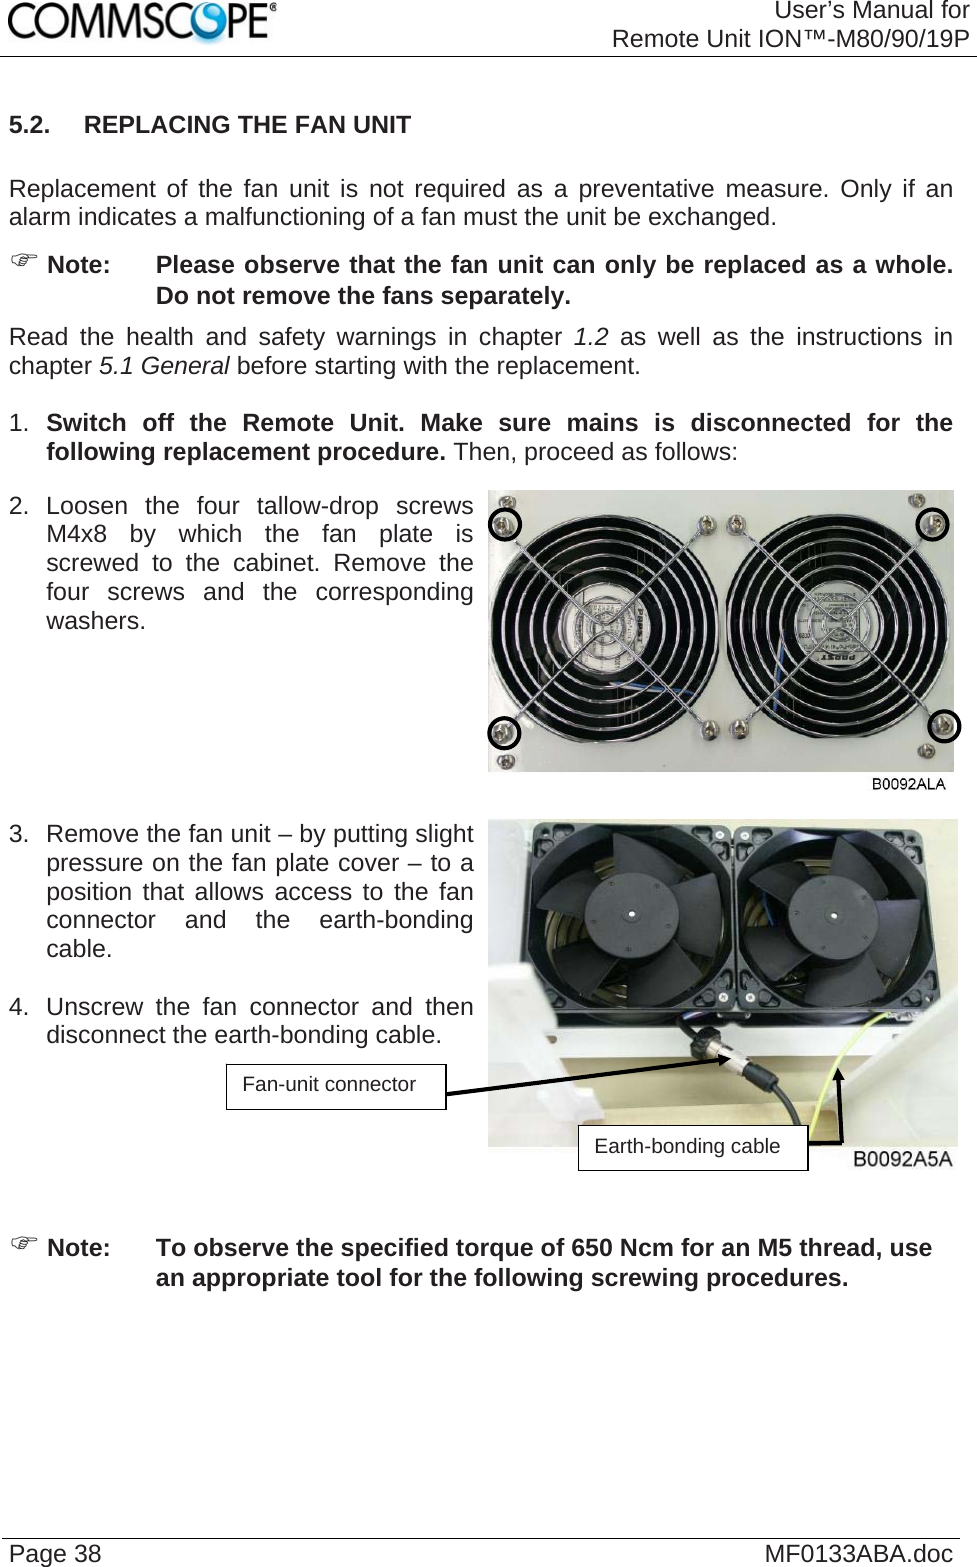 User’s Manual forRemote Unit ION™-M80/90/19P Page 38  MF0133ABA.doc5.2.  REPLACING THE FAN UNIT  Replacement of the fan unit is not required as a preventative measure. Only if an alarm indicates a malfunctioning of a fan must the unit be exchanged. ) Note:  Please observe that the fan unit can only be replaced as a whole. Do not remove the fans separately. Read the health and safety warnings in chapter 1.2 as well as the instructions in chapter 5.1 General before starting with the replacement.   1.  Switch off the Remote Unit. Make sure mains is disconnected for the following replacement procedure. Then, proceed as follows: 2. Loosen the four tallow-drop screws M4x8 by which the fan plate is screwed to the cabinet. Remove the four screws and the corresponding washers.    3.  Remove the fan unit – by putting slight pressure on the fan plate cover – to a position that allows access to the fan connector and the earth-bonding cable.   4.  Unscrew the fan connector and then disconnect the earth-bonding cable.    Fan-unit co ector nnEarth-bonding cable ) Note:  To observe the specified torque of 650 Ncm for an M5 thread, use an appropriate tool for the following screwing procedures.  